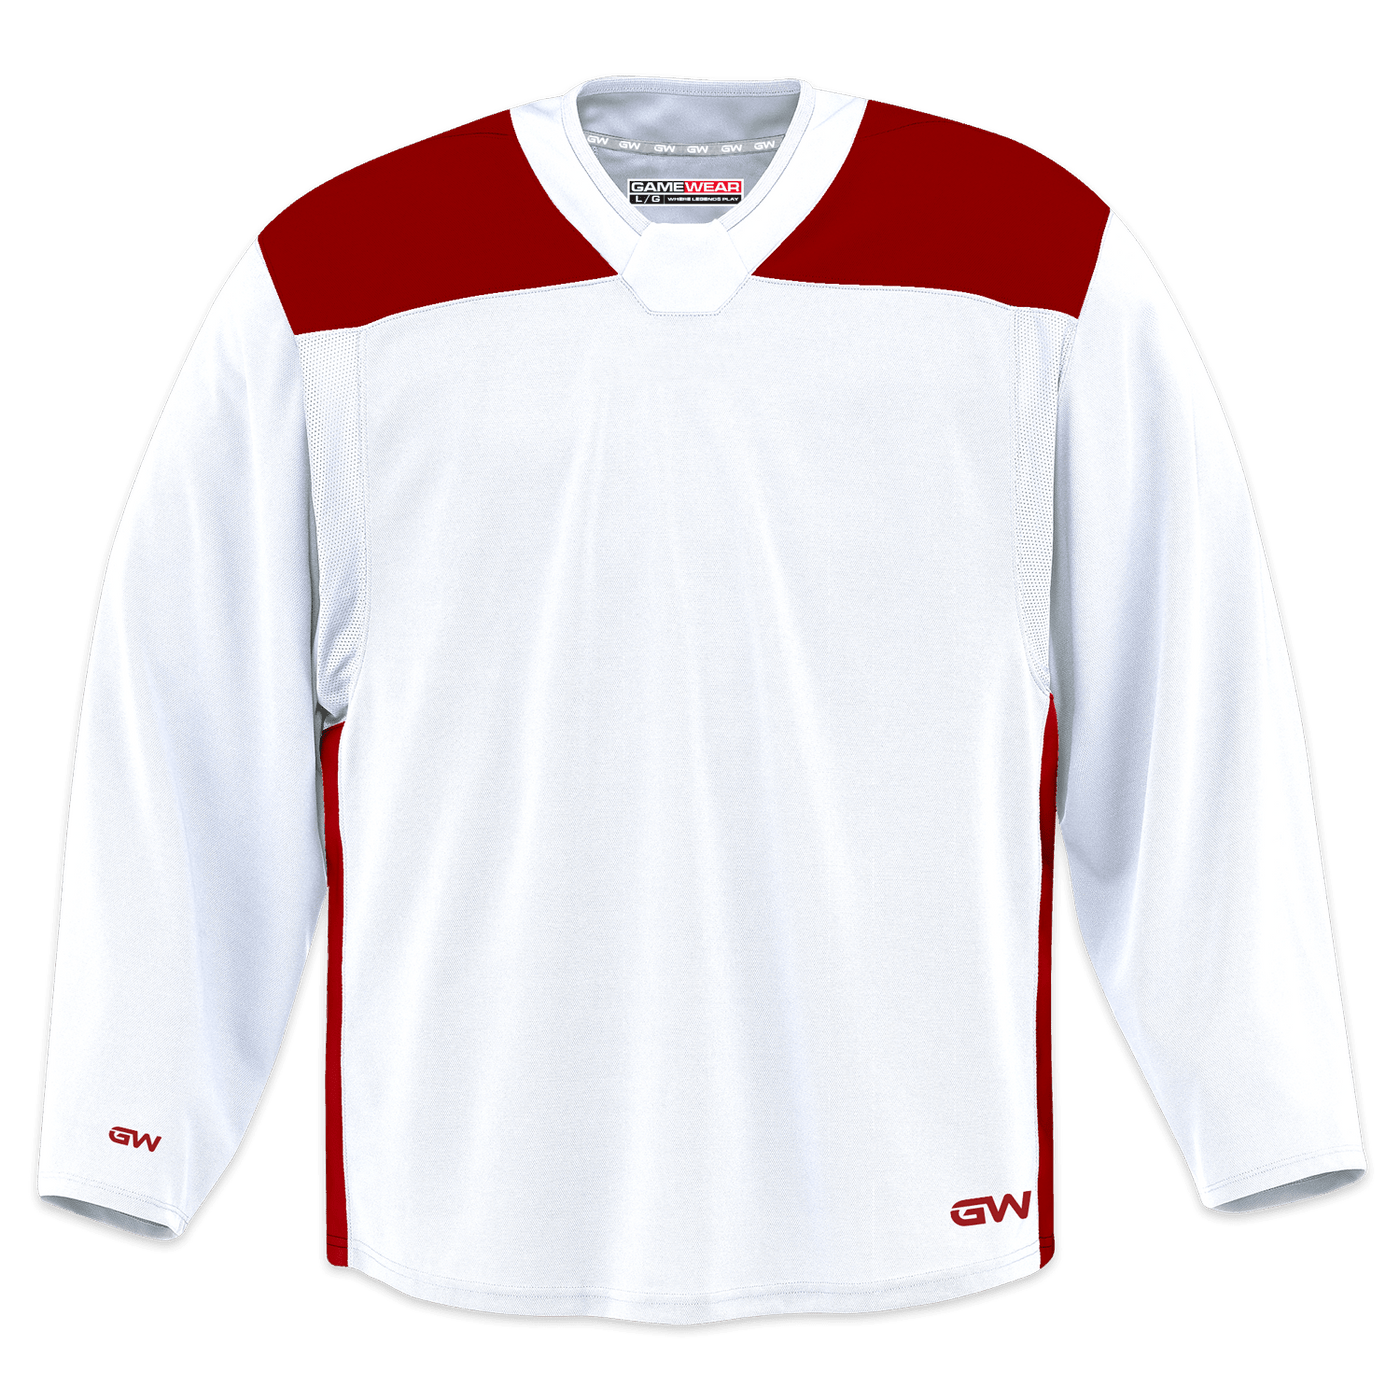 GameWear GW6500 ProLite Series Senior Hockey Practice Jersey - White / Red - The Hockey Shop Source For Sports